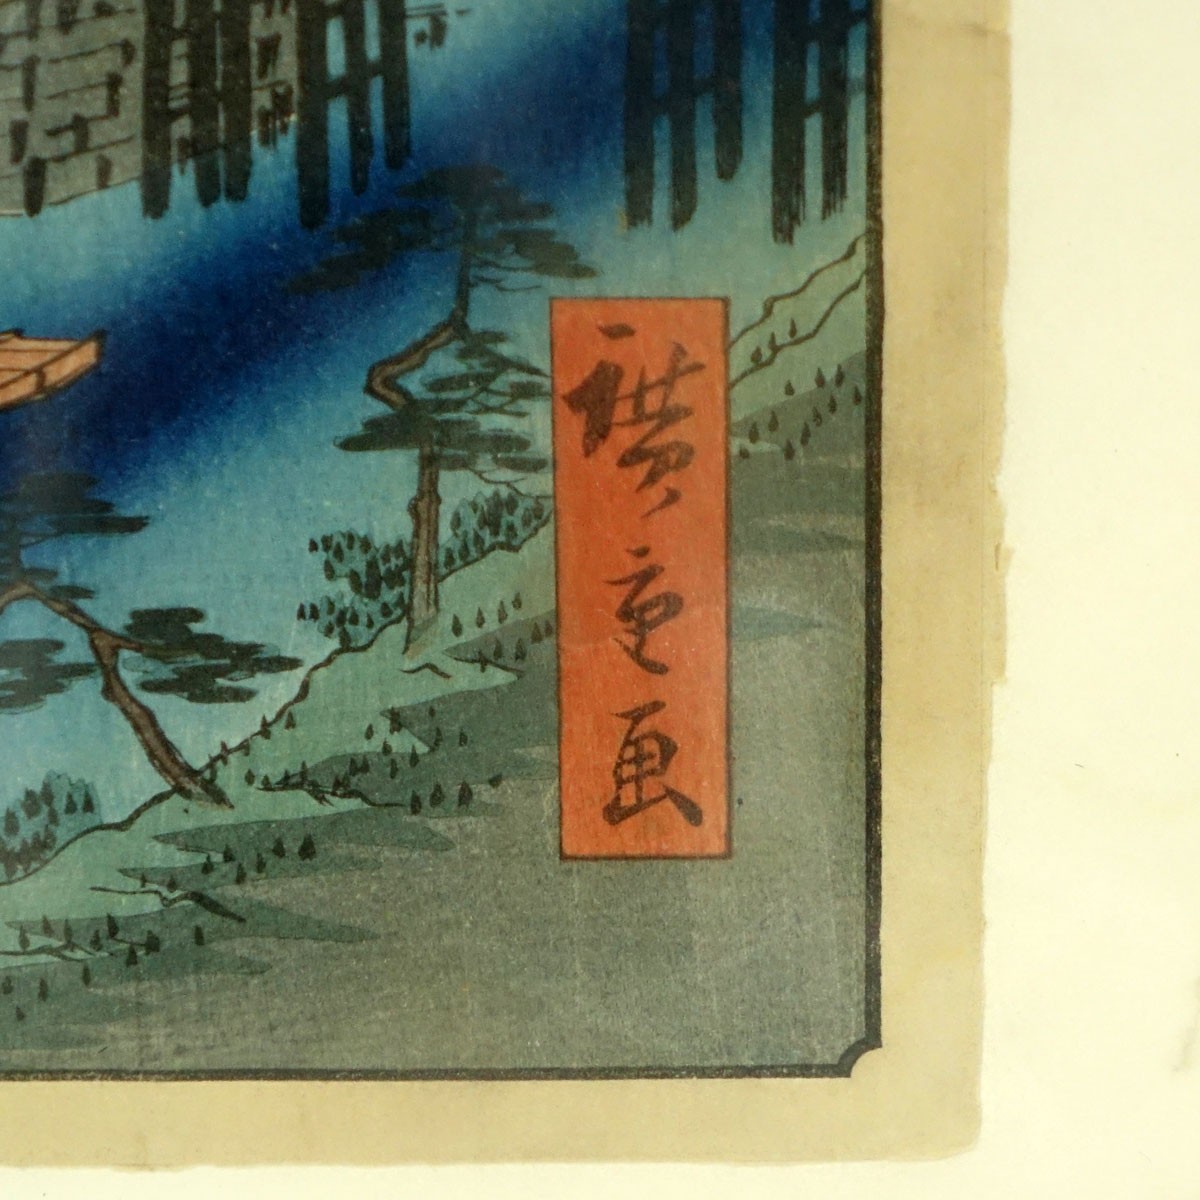 After: Utagawa Hiroshige, Japanese Color Woodblock Print, Landscape Scene with Bridge and Blue River, Signed in the Plate. Stamped marks on margin.